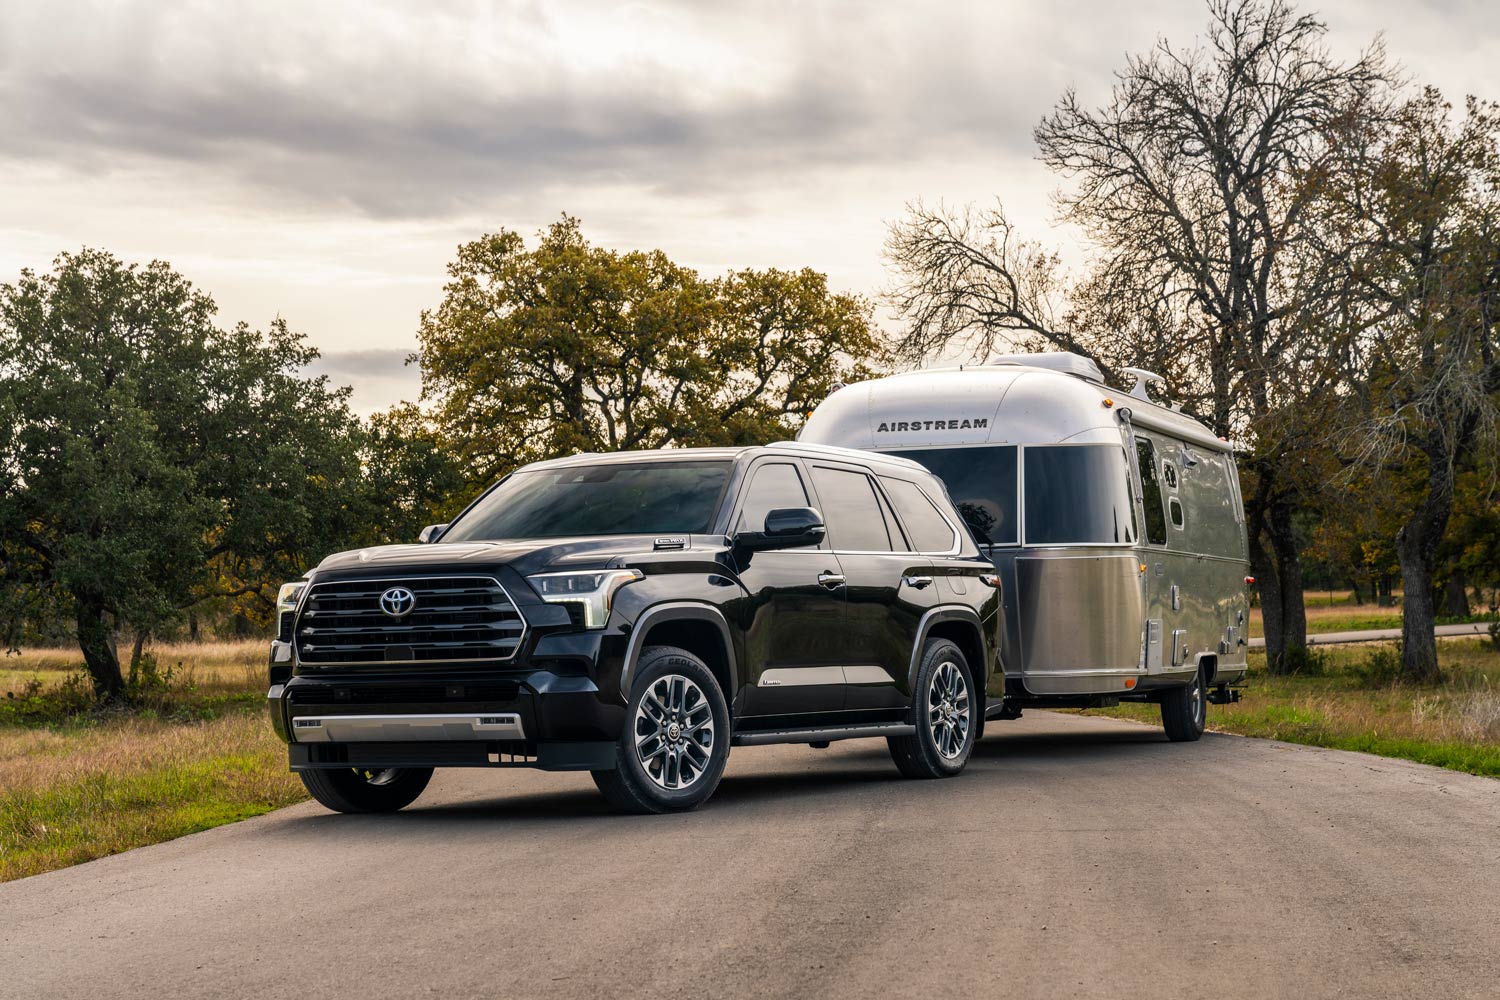 2023 Toyota Sequoia towing an Airstream trailer on a country road